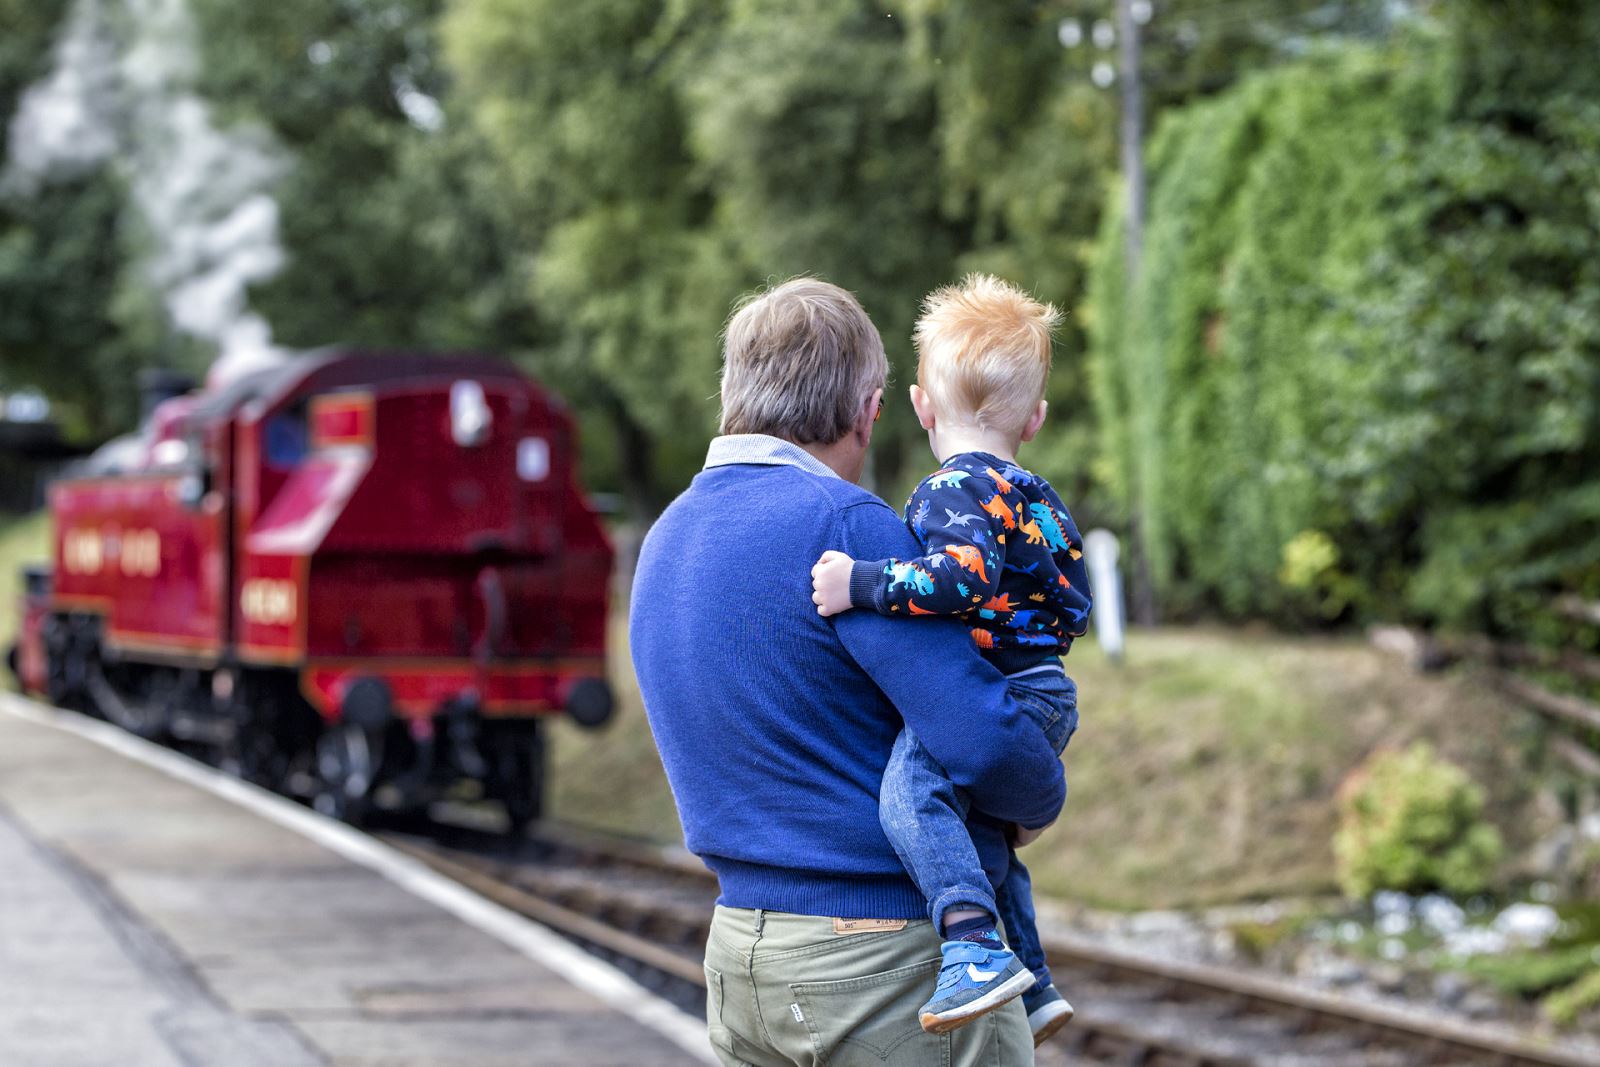 Half Term Happiness at the Keighley & Worth Valley Railway